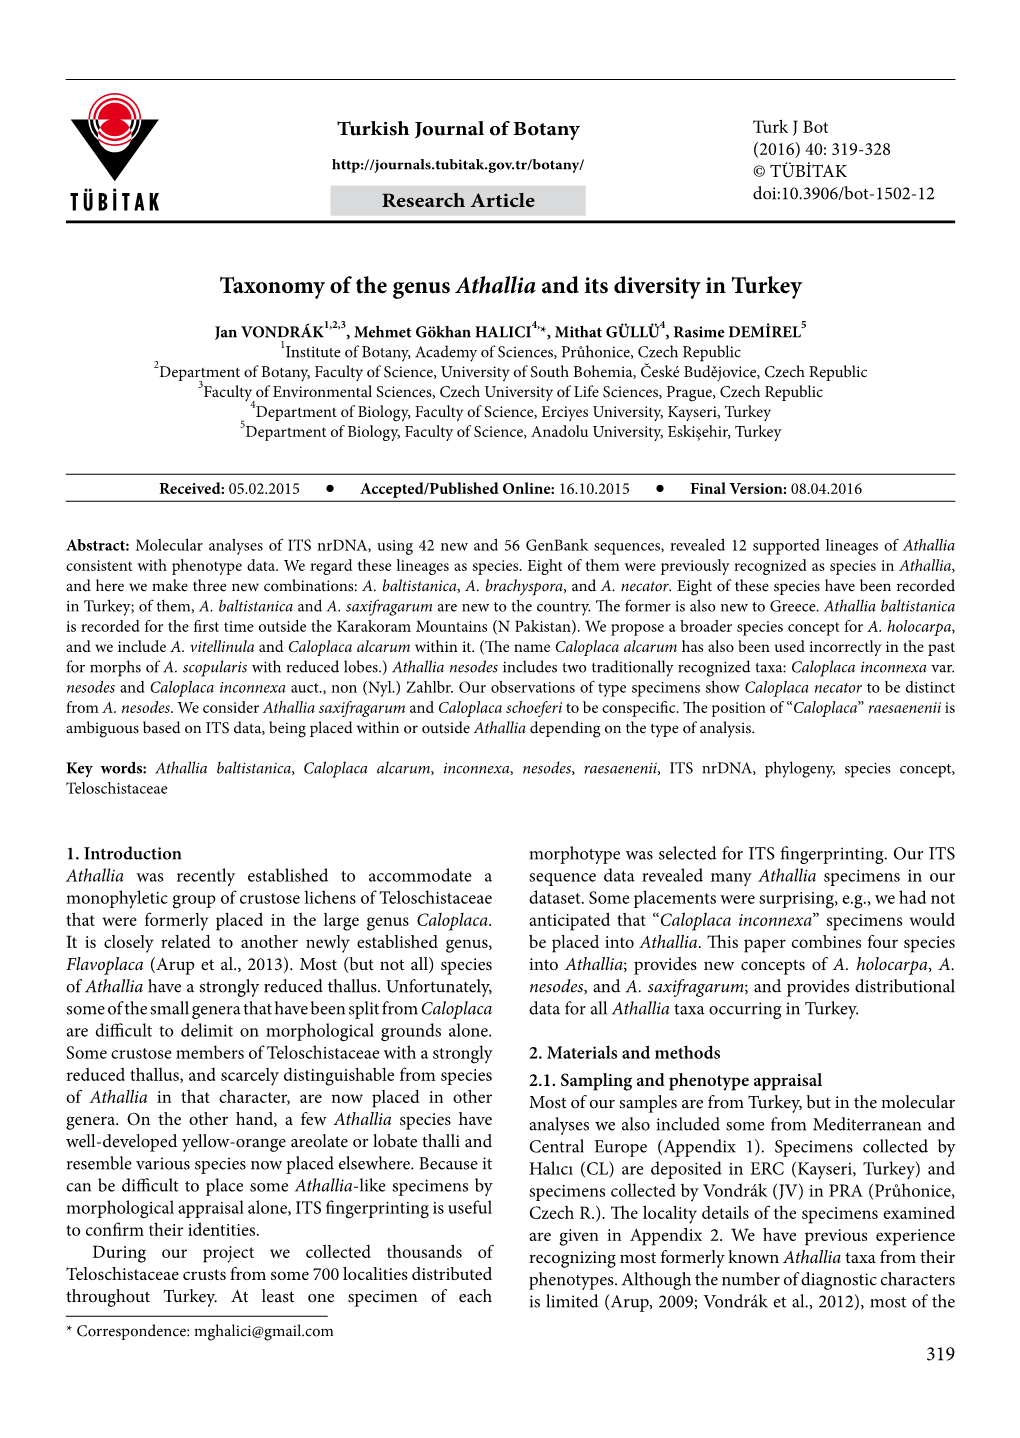 Taxonomy of the Genus Athallia and Its Diversity in Turkey